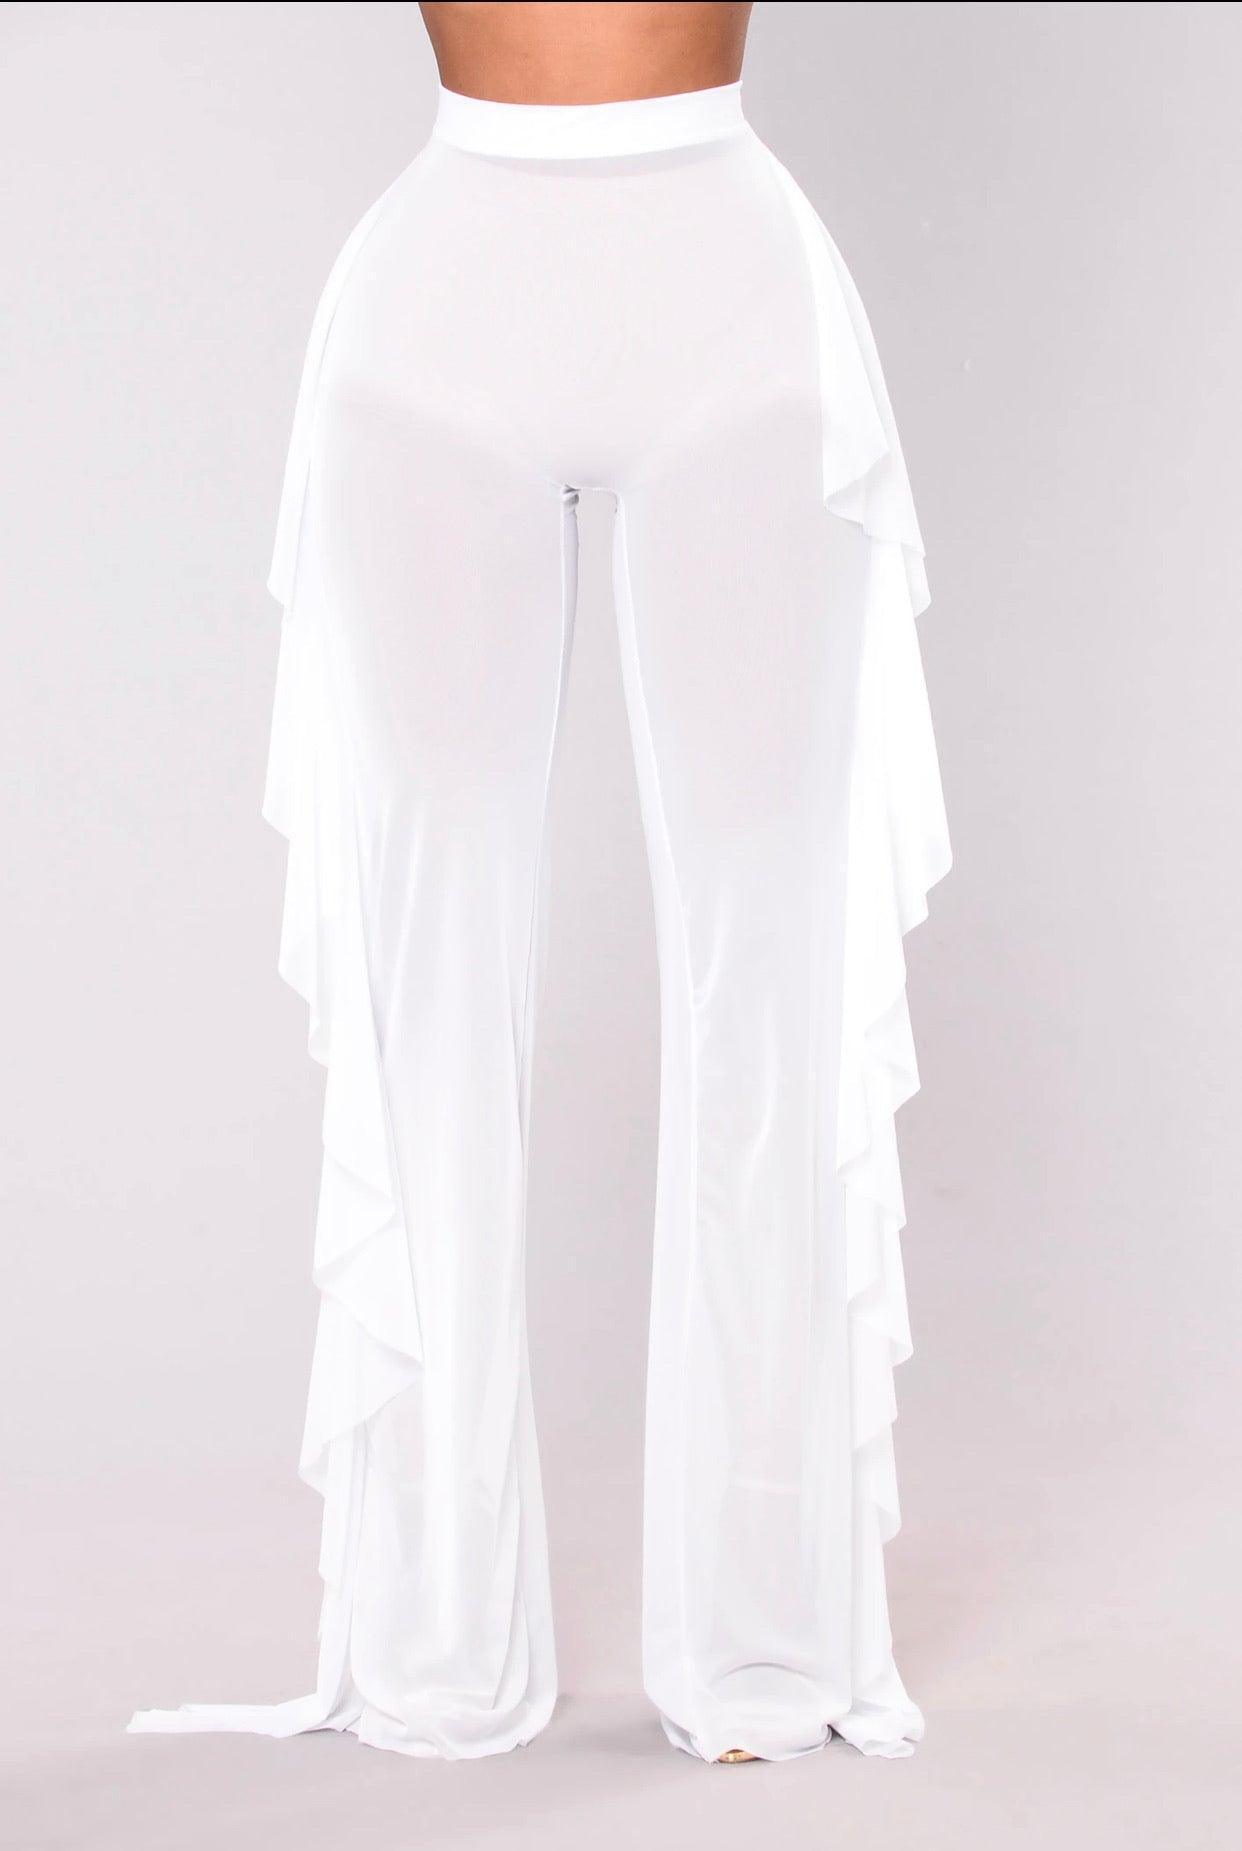 See Through Pants, [product type]